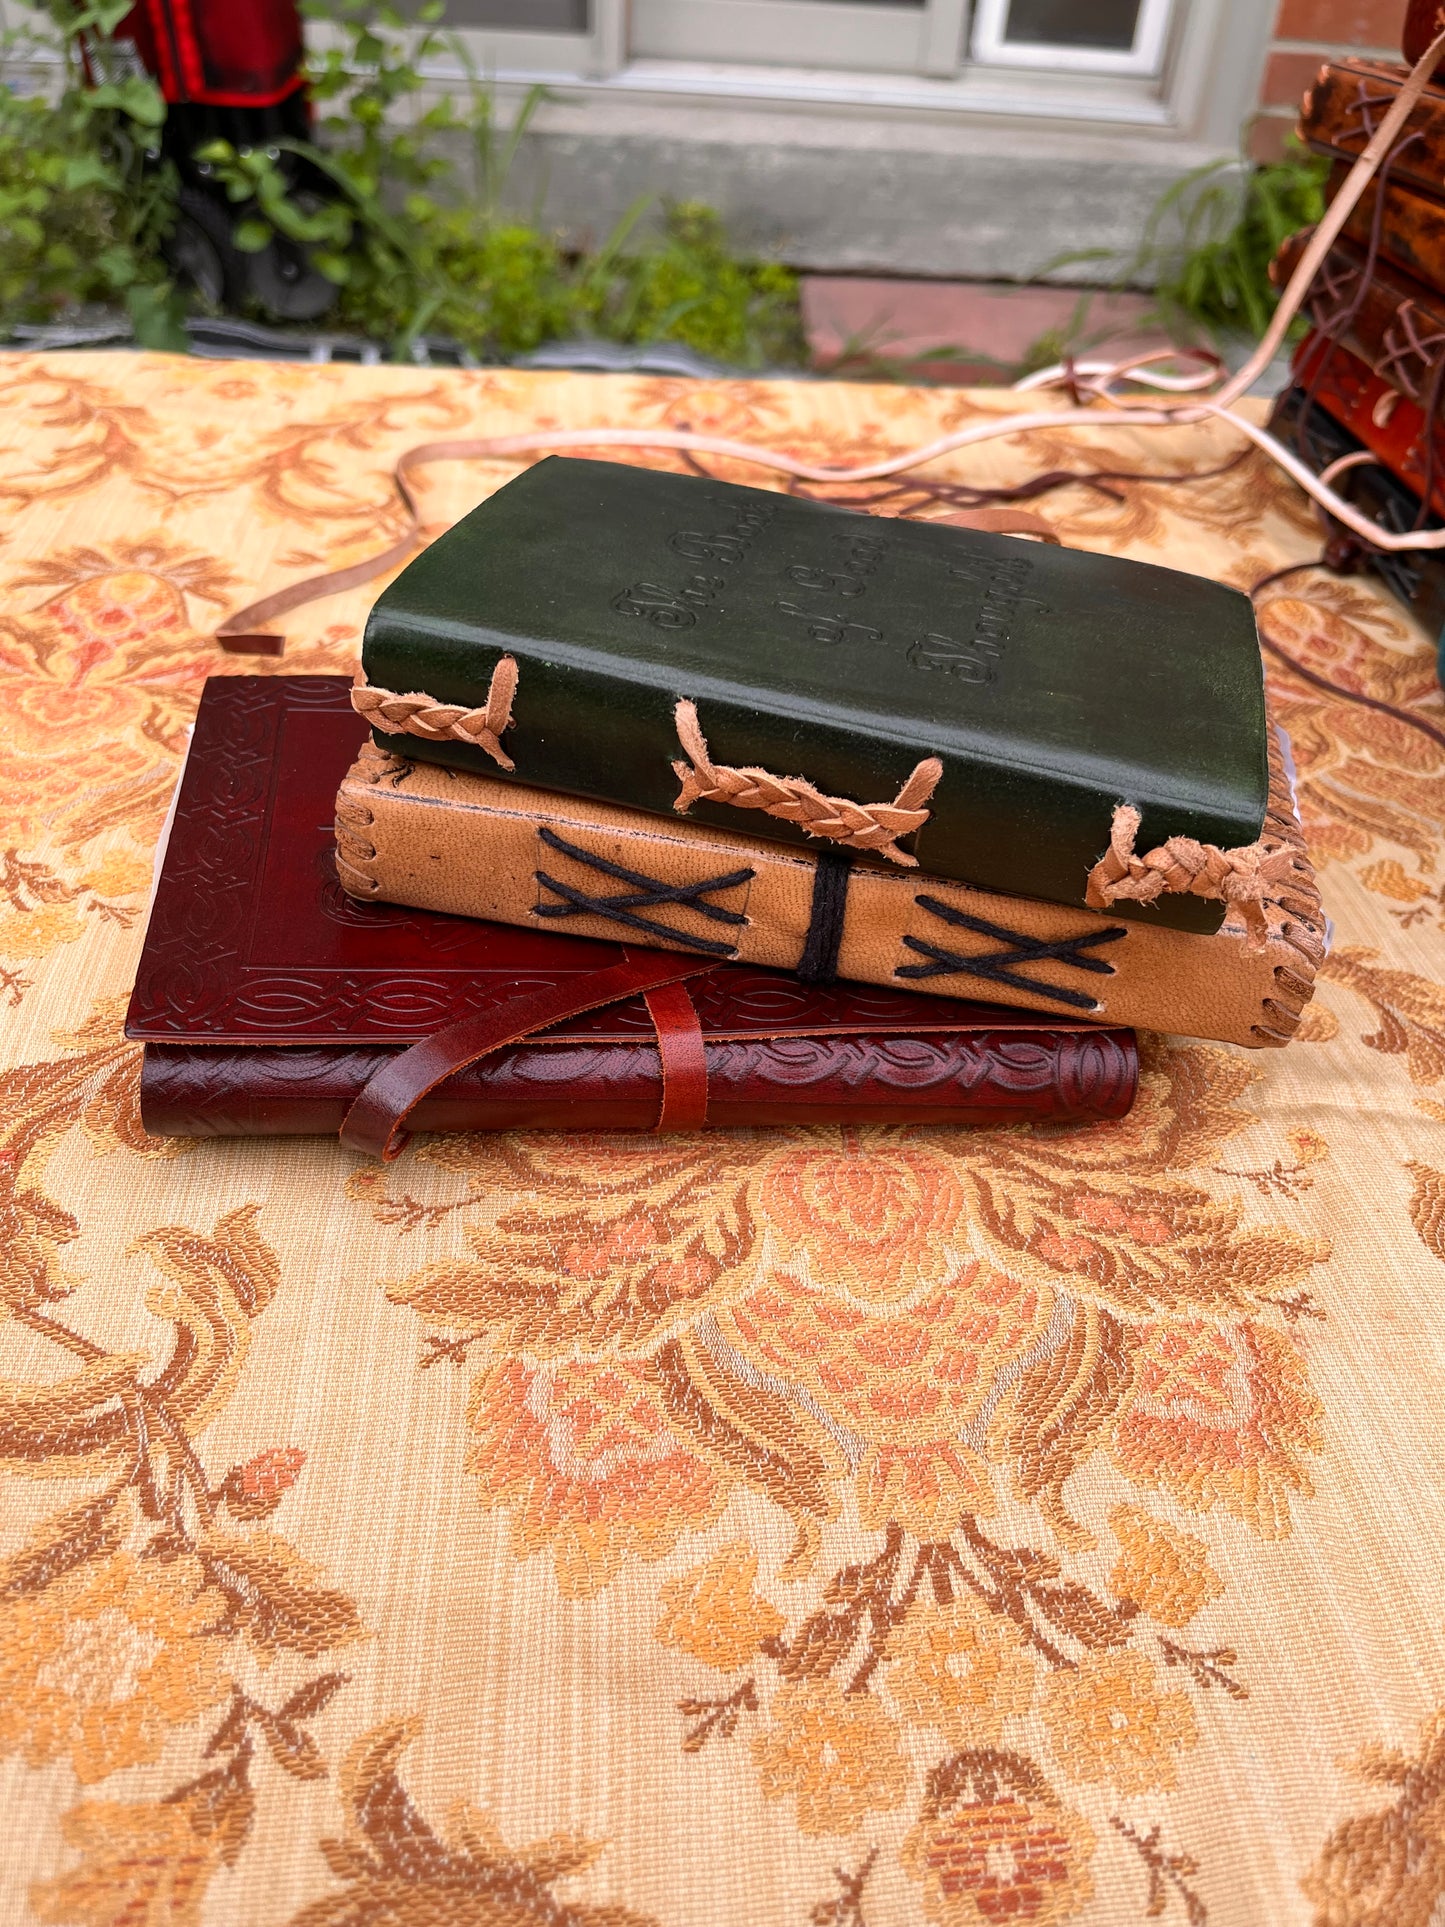 Book of Good Thoughts - Green Leather Journal